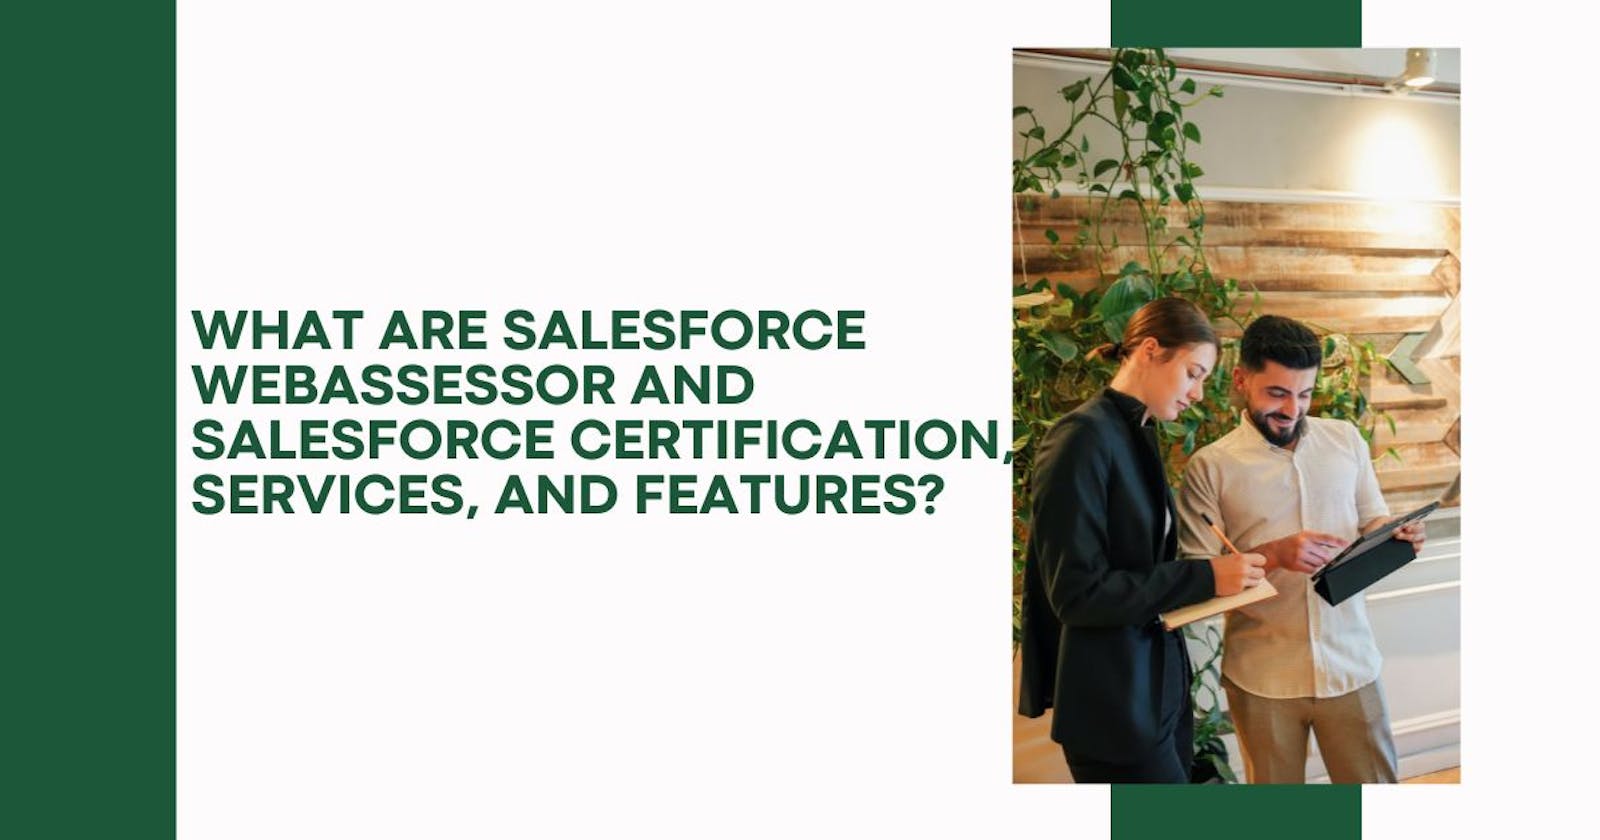 What are Salesforce Webassessor and Salesforce certification, services, and features?